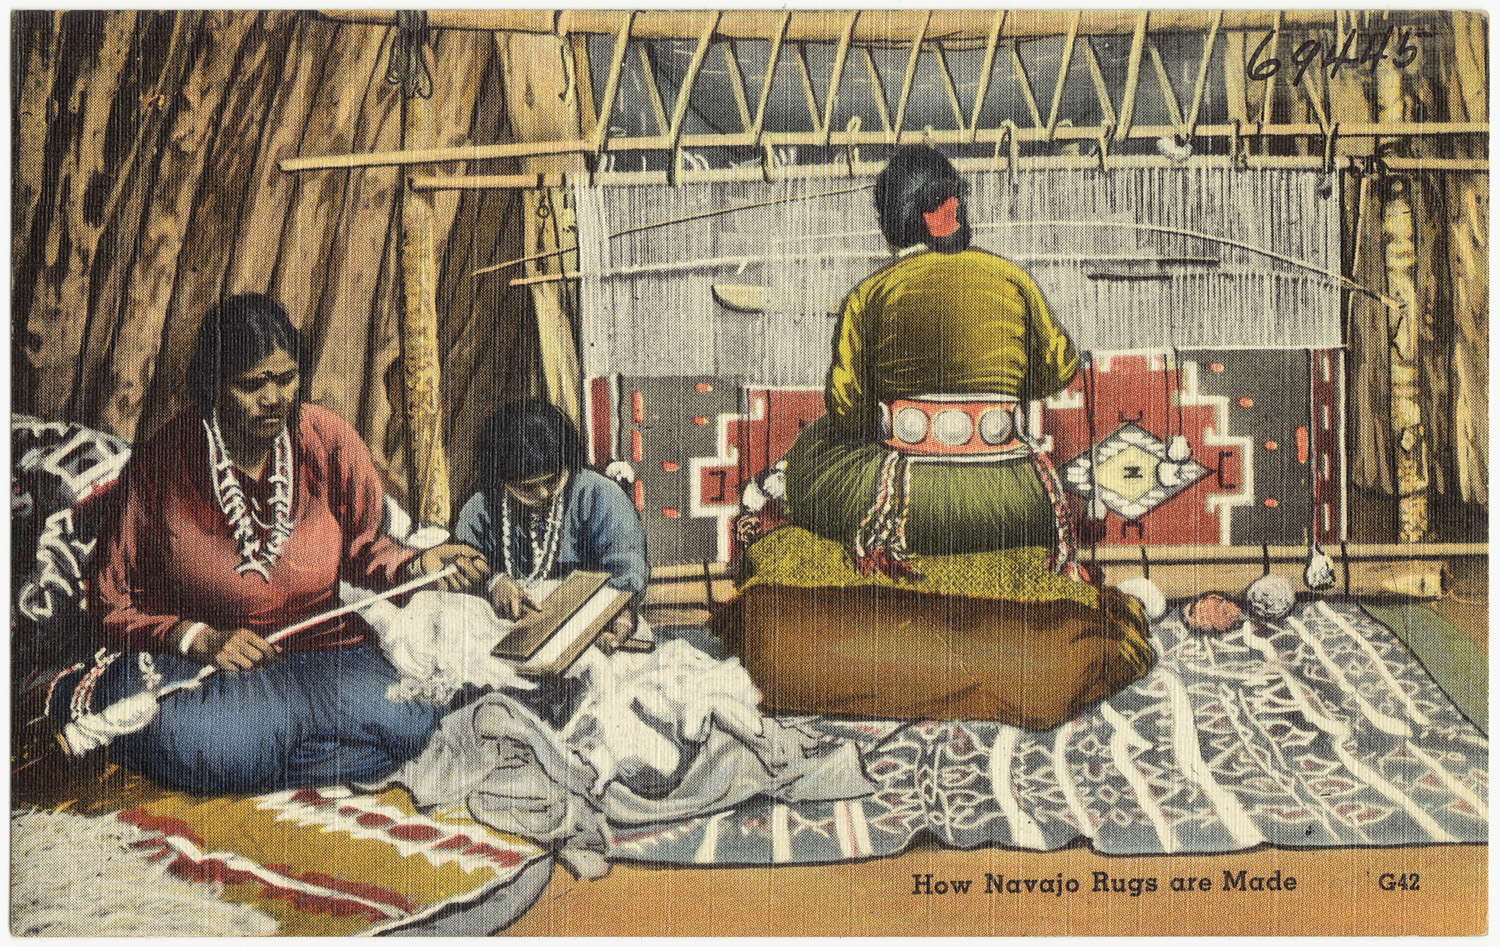 Preparing and Weaving a Rug